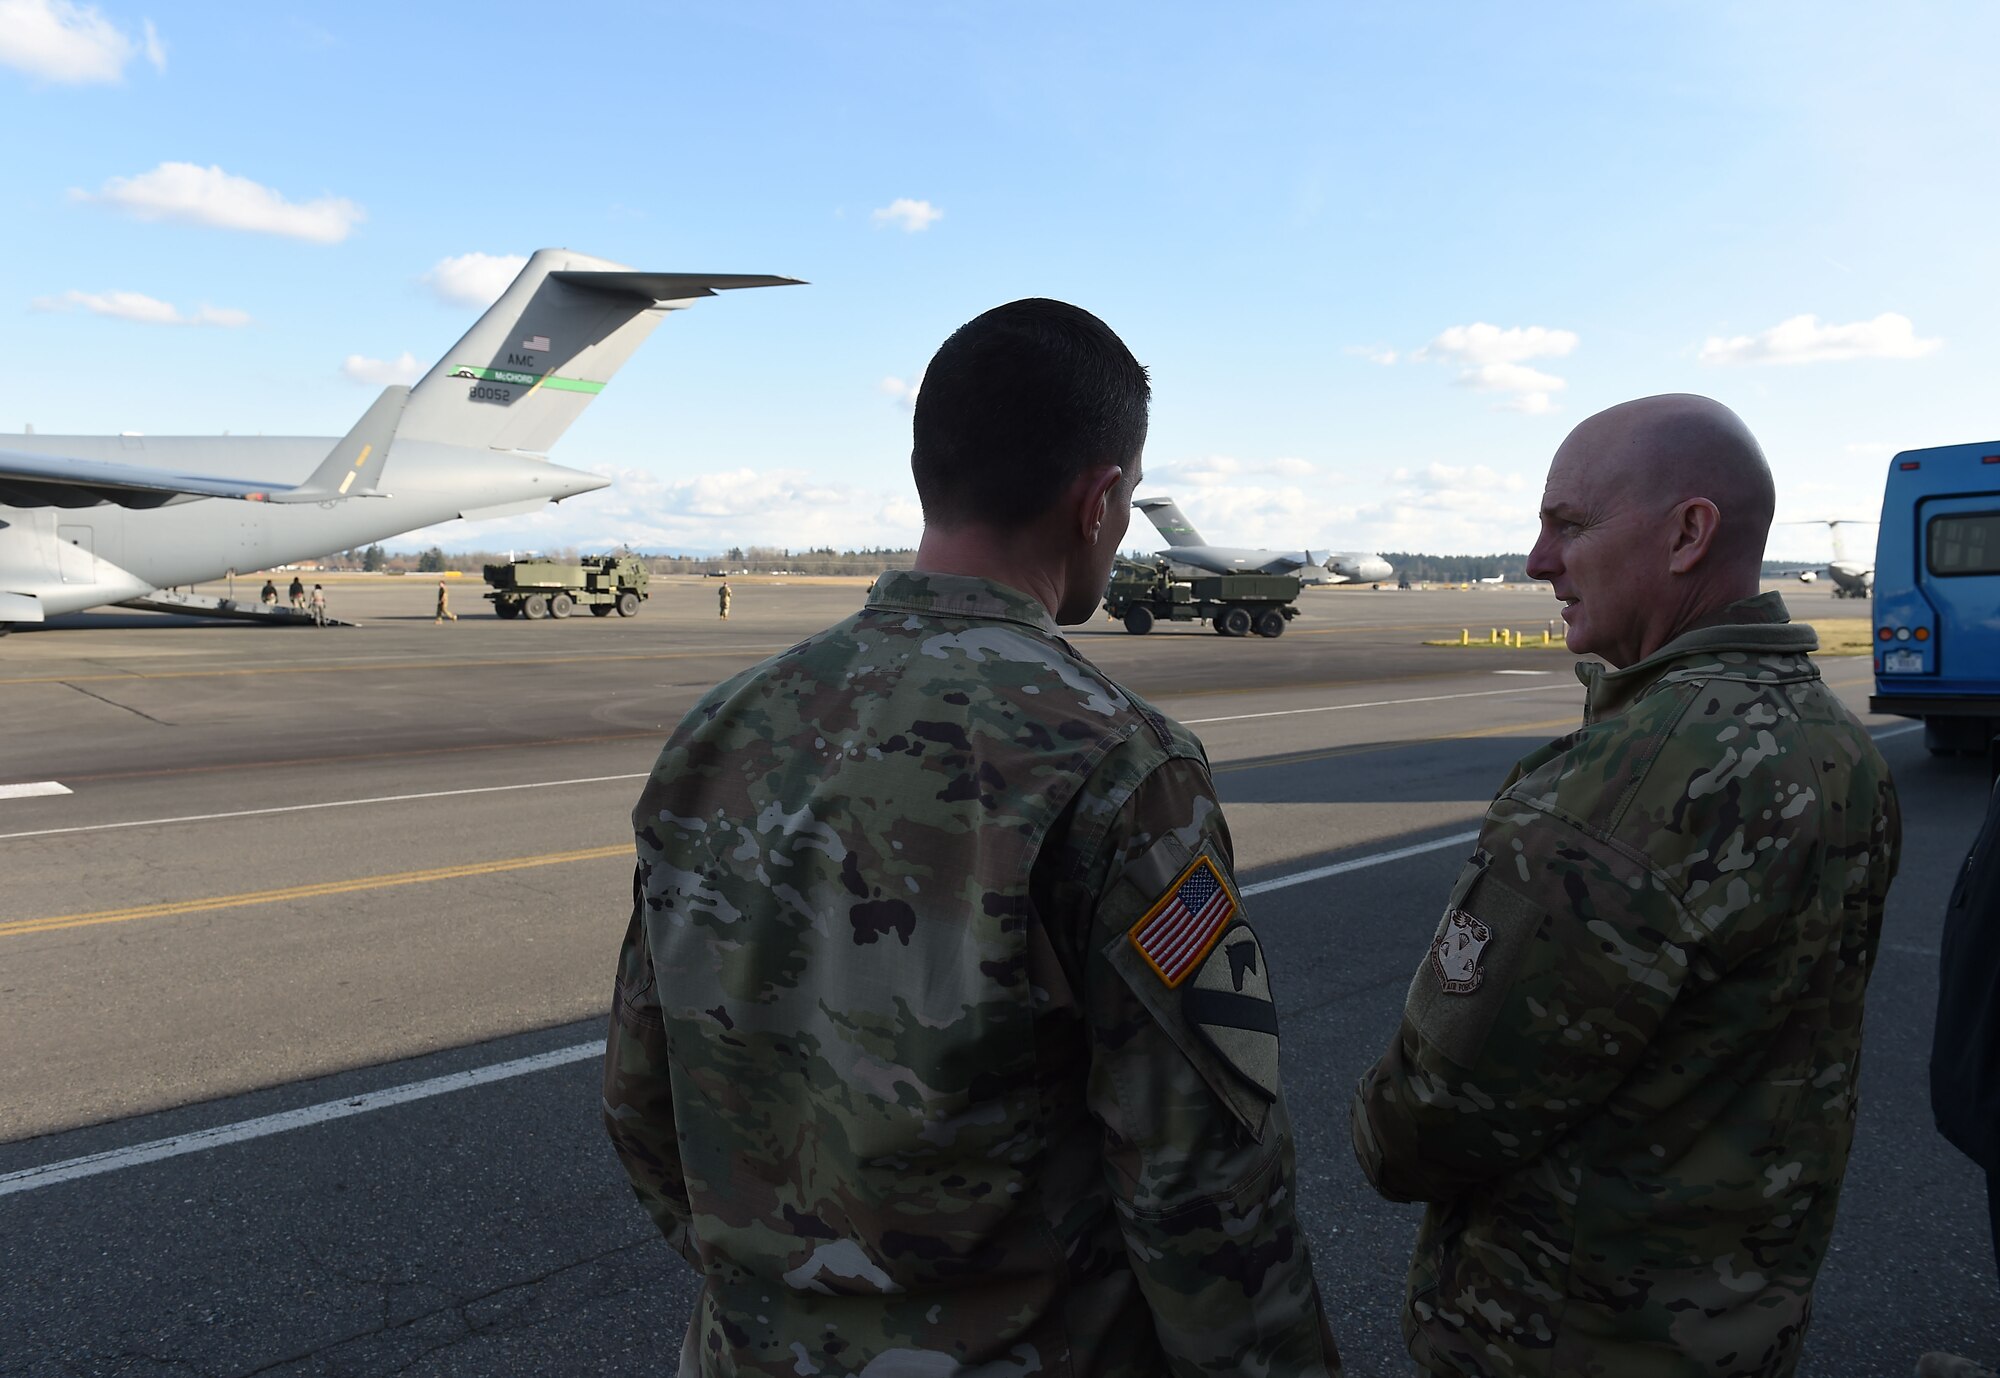 Maj. Gen. Sam Barrett, 18th Air Force commander, right, observes as U.S. Army high mobility artillery rocket systems (HIMARS) offload from a McChord C-17 Globemaster III on Joint Base Lewis-McChord, Wash., Feb. 21, 2019.